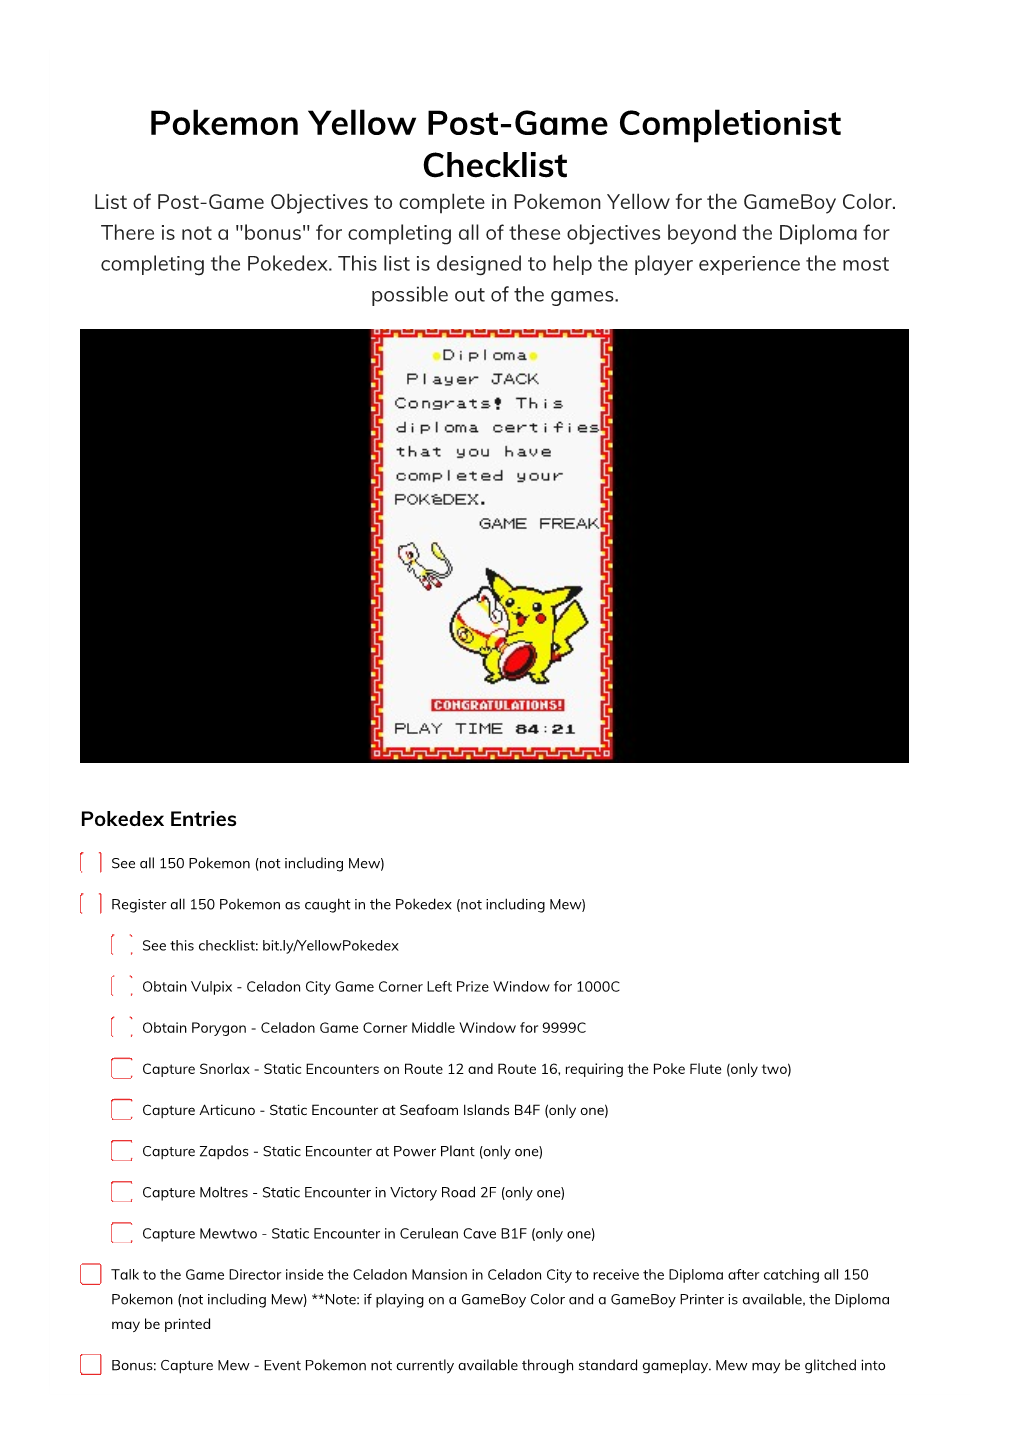 Pokemon Yellow Post-Game Completionist Checklist List of Post-Game Objectives to Complete in Pokemon Yellow for the Gameboy Color